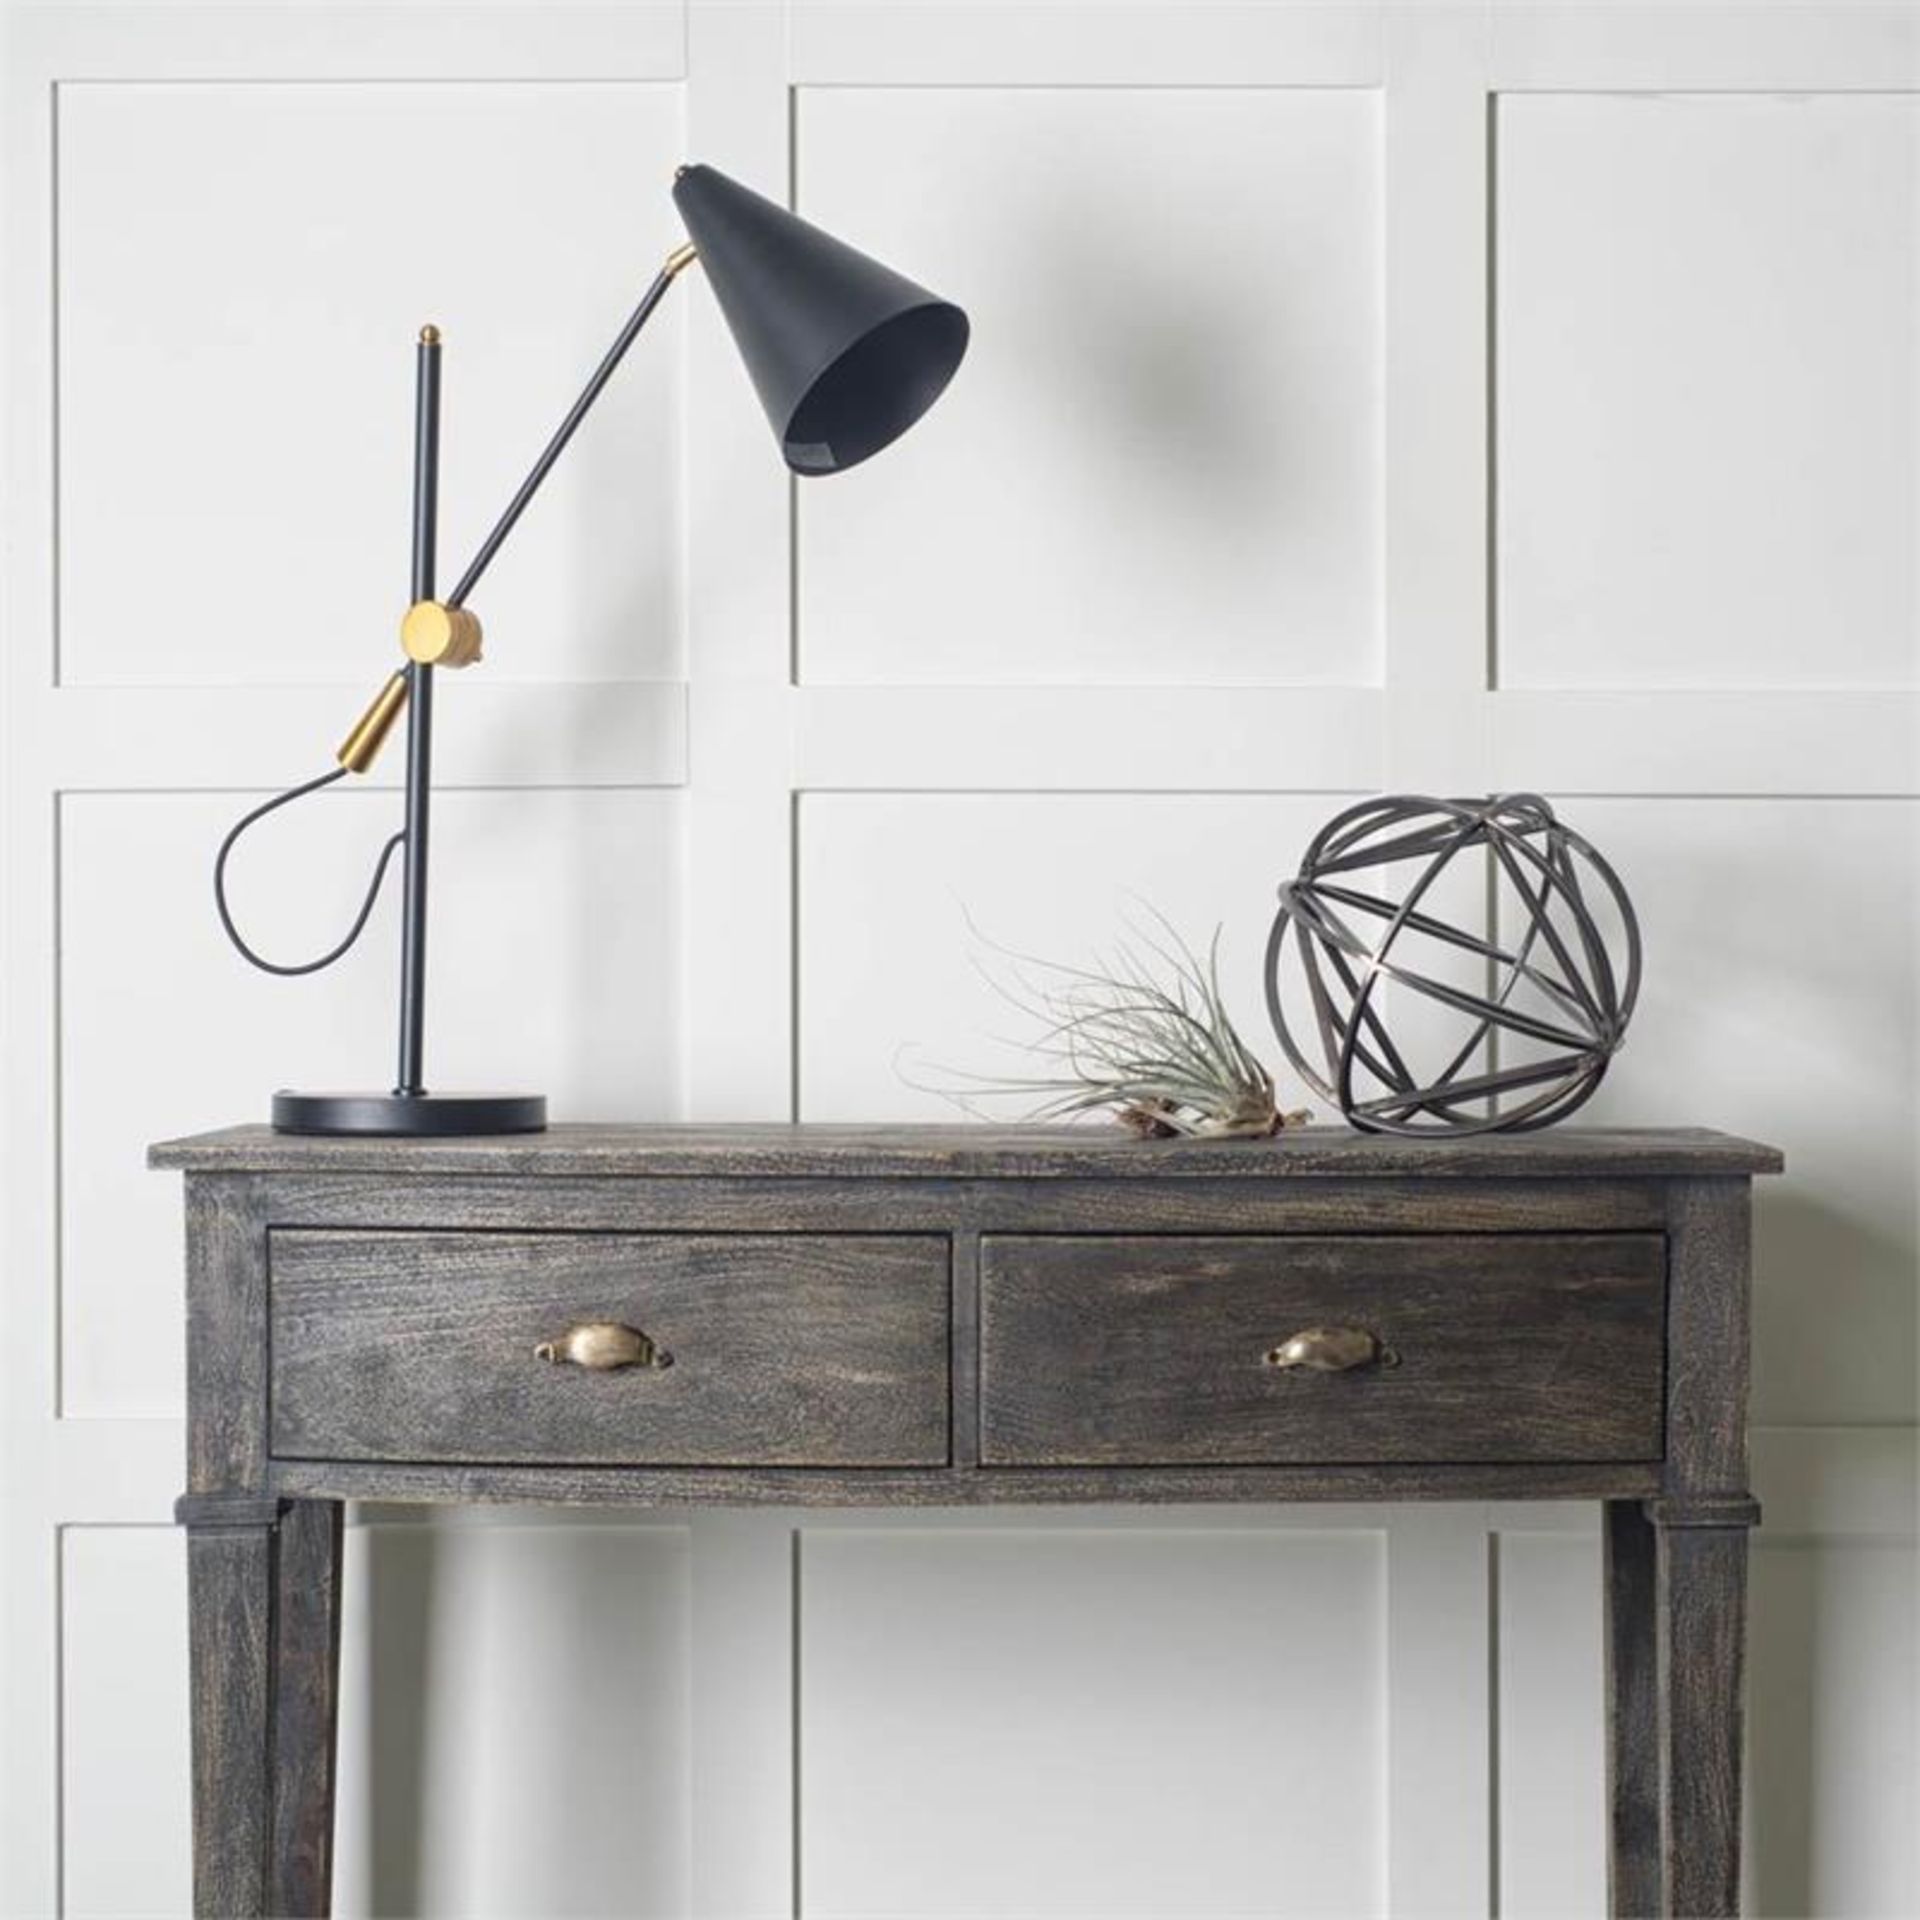 Black and Brass Adjustable Desk Lamp With Cone Shade, a quirky and stylish lighting piece that is